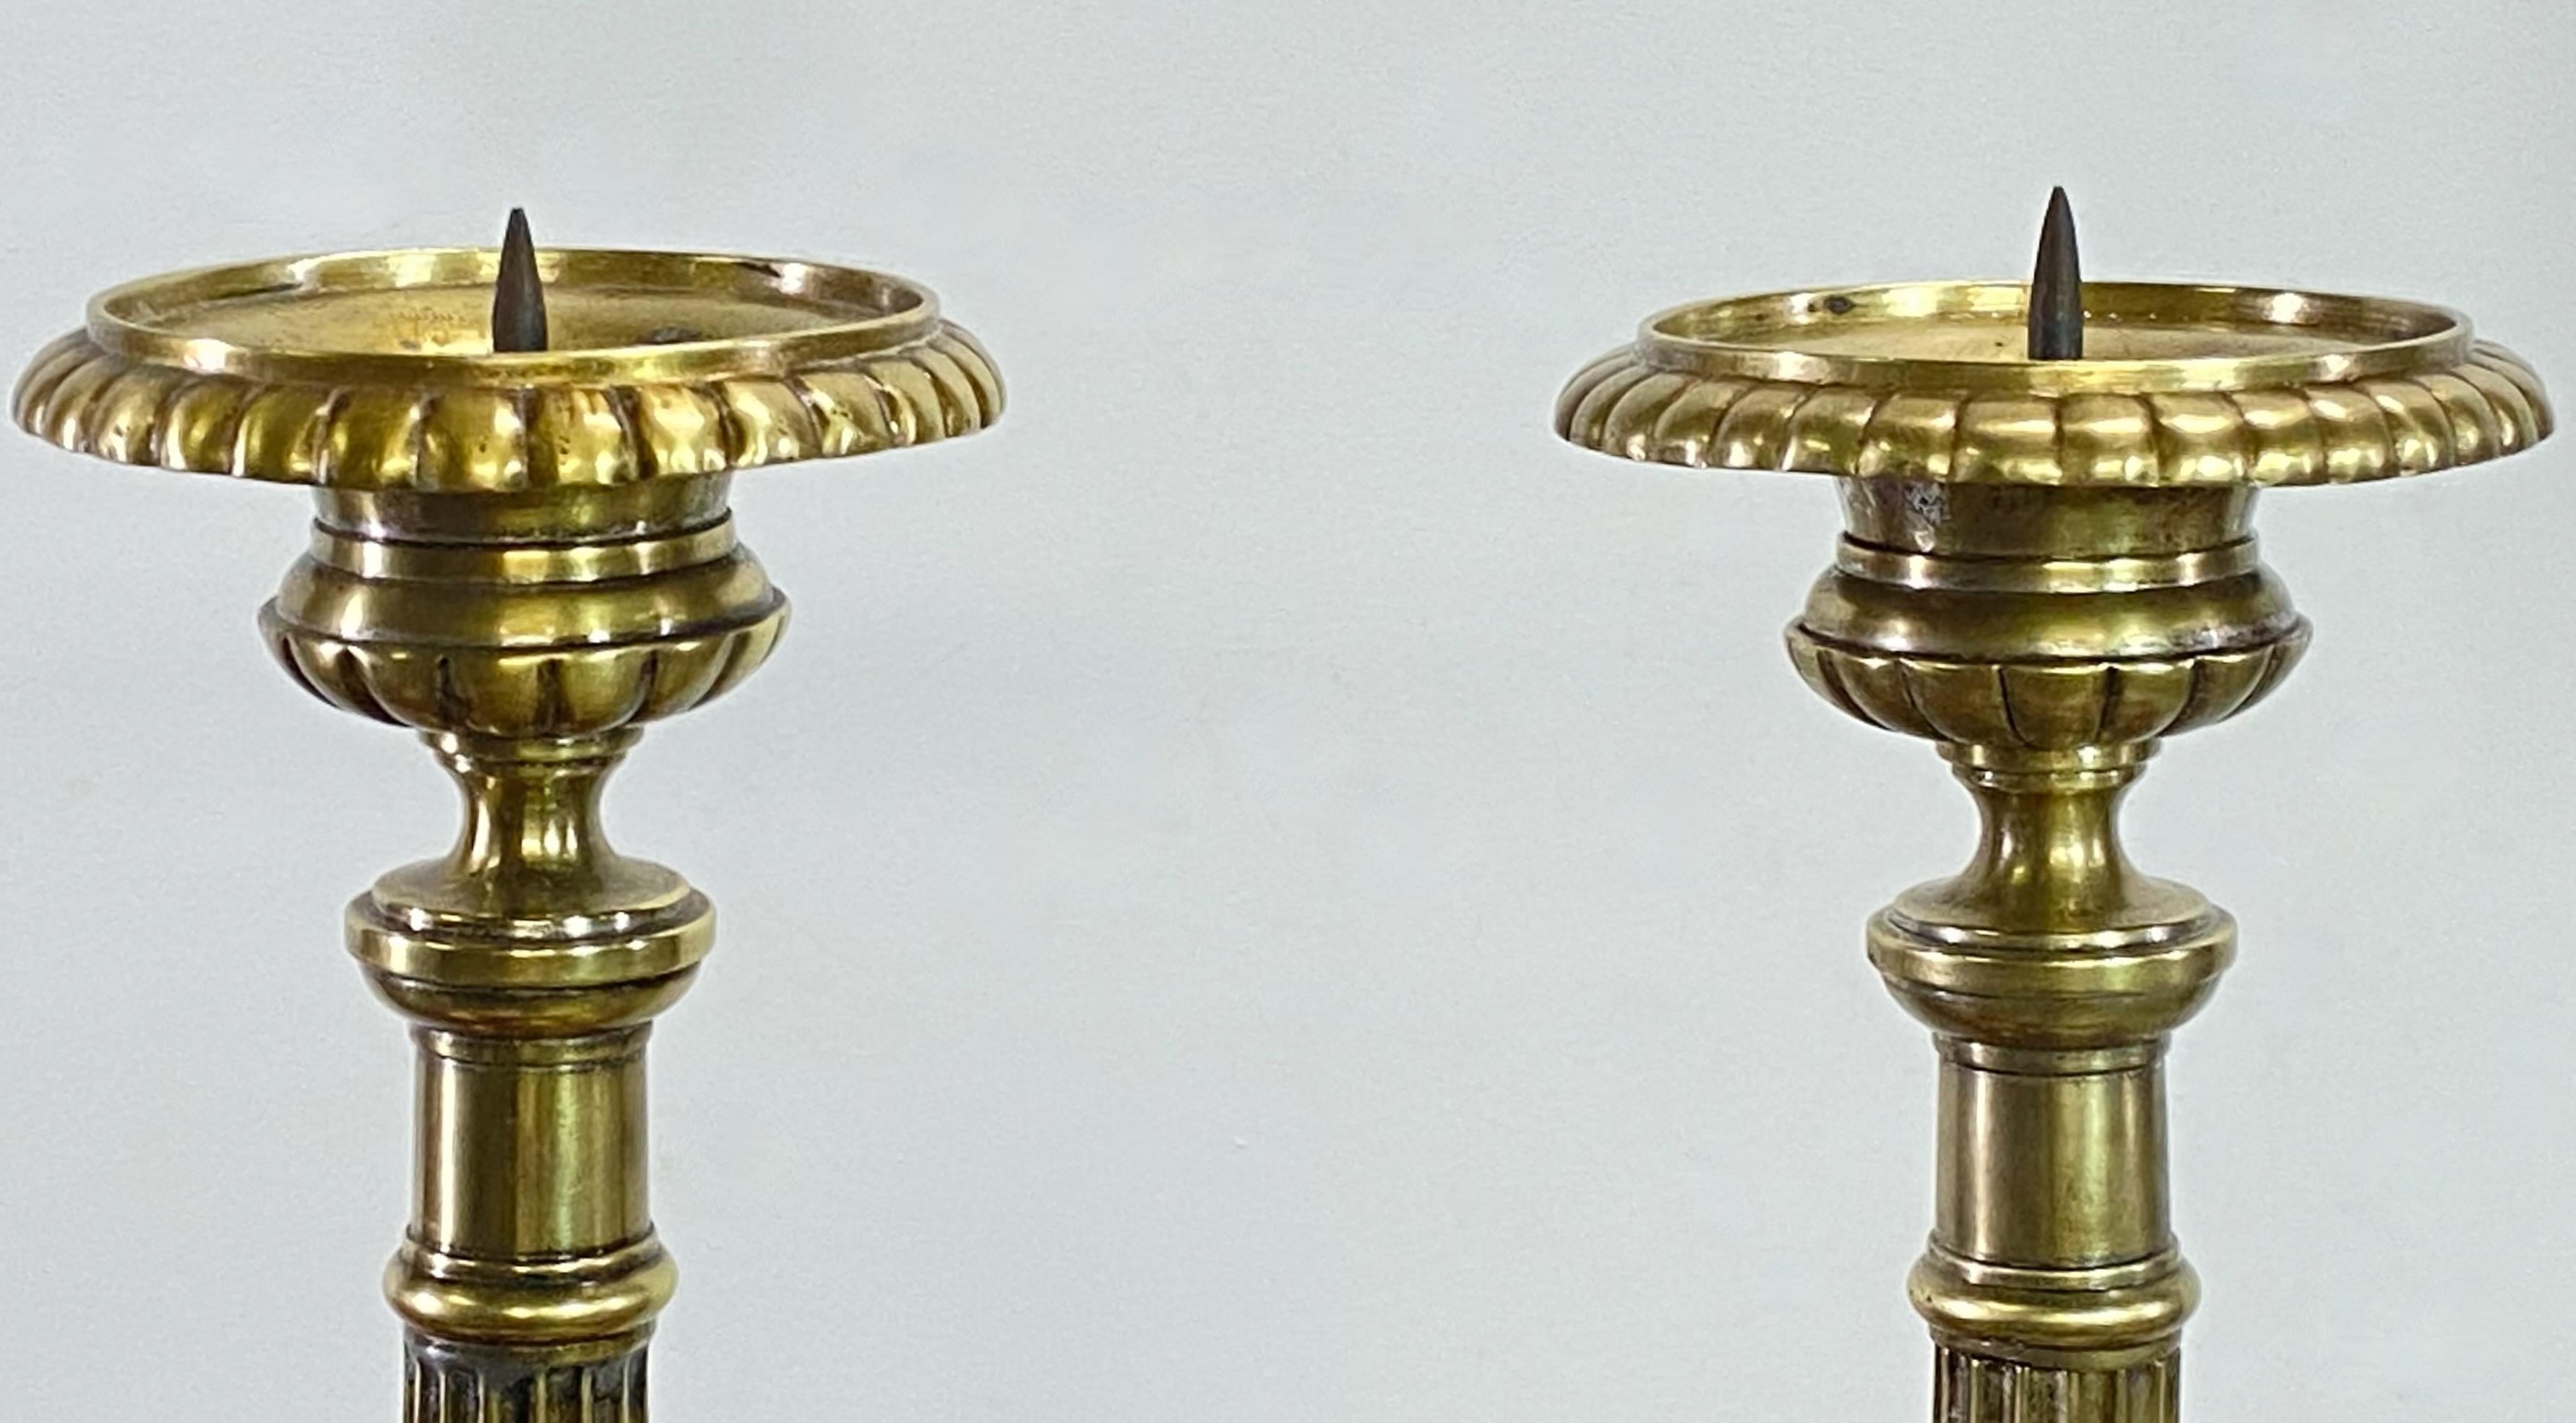 Pair of Early 19th Century European Brass Candlesticks, circa 1840 For Sale 6